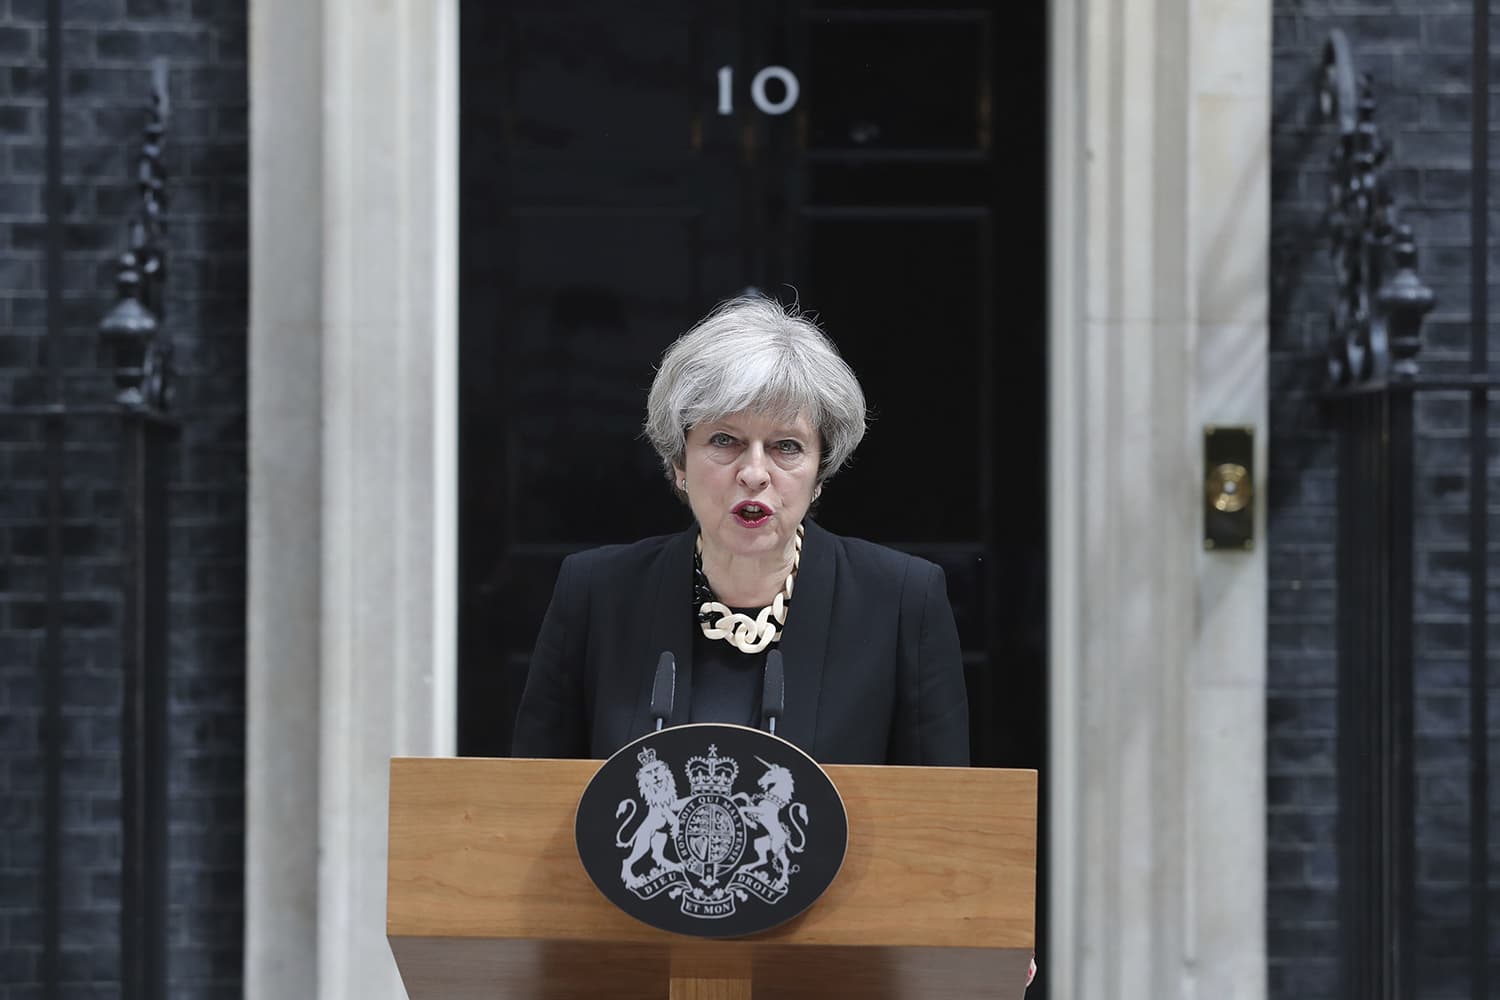 Britain's Prime Minister Theresa May makes a statement in Downing Street, London, after chairing a meeting of the Government's emergency Cobra committee following Saturday night's terrorist incident in London. Several people were killed in the terror attack at the heart of London and dozens injured. The prime minister called for a tougher stance at home against extremists. (Andrew Matthews/PA via AP)